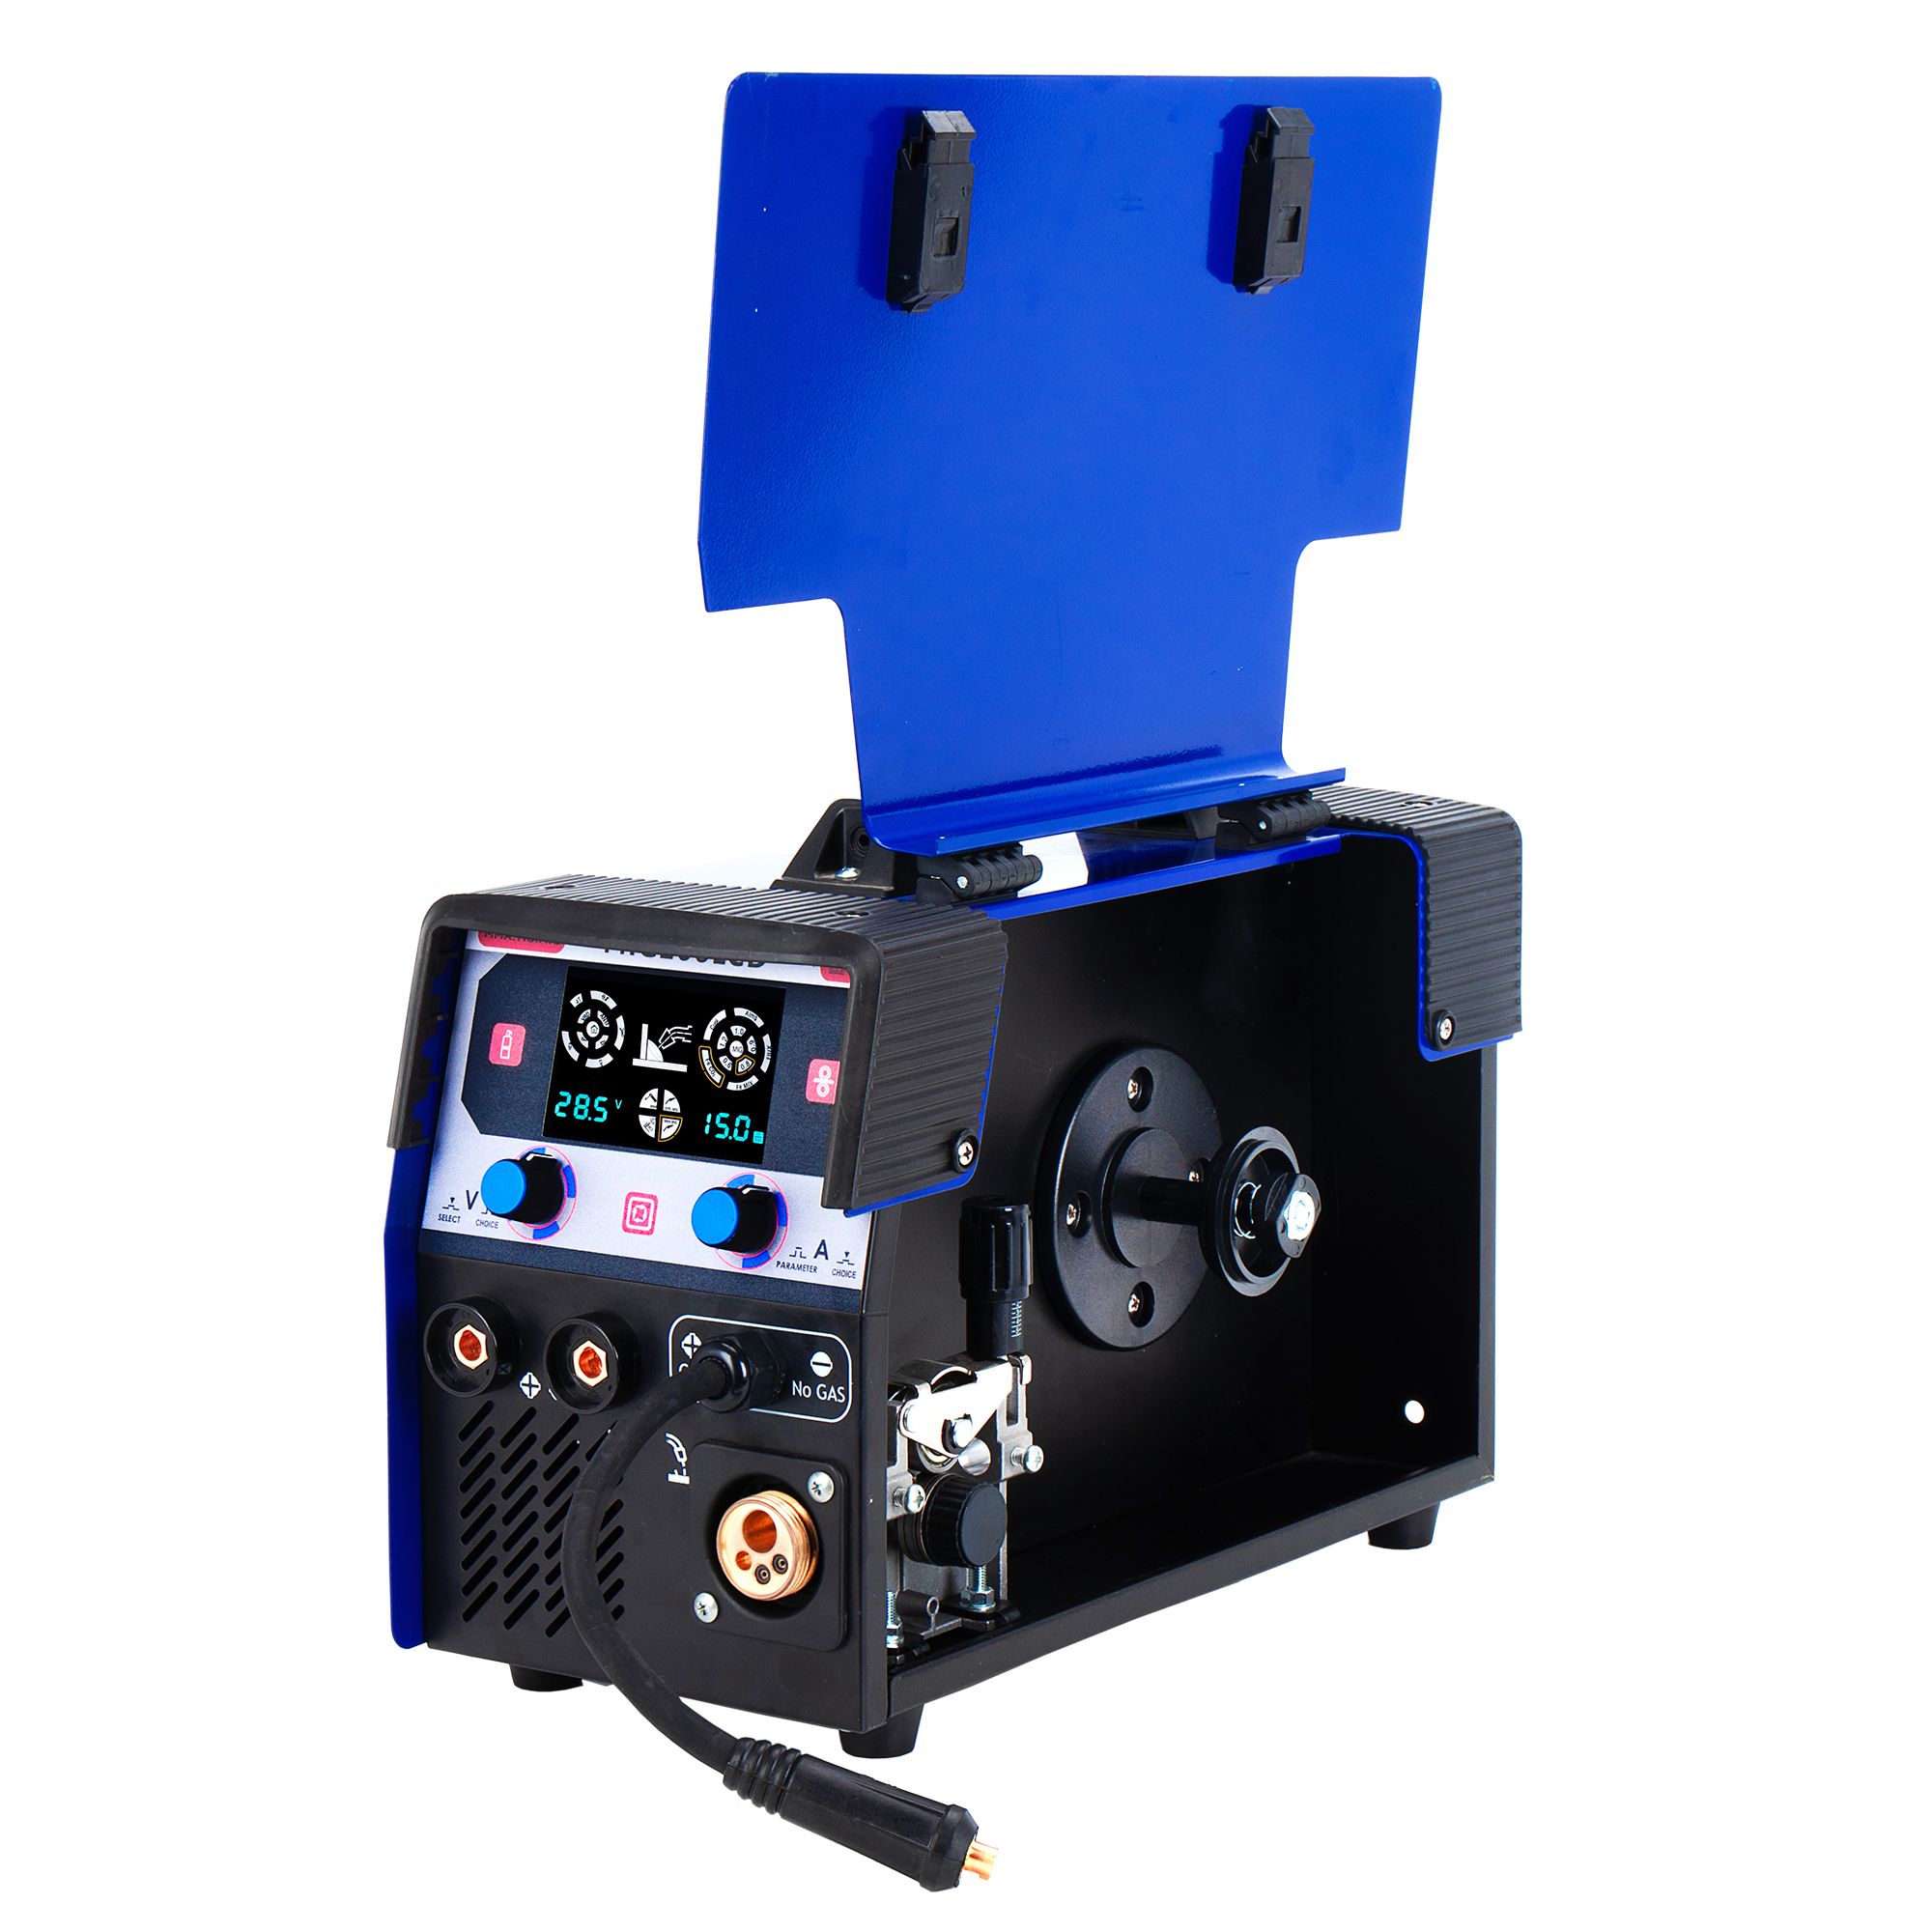 3 IN 1 multi-function inverter welder with LCD